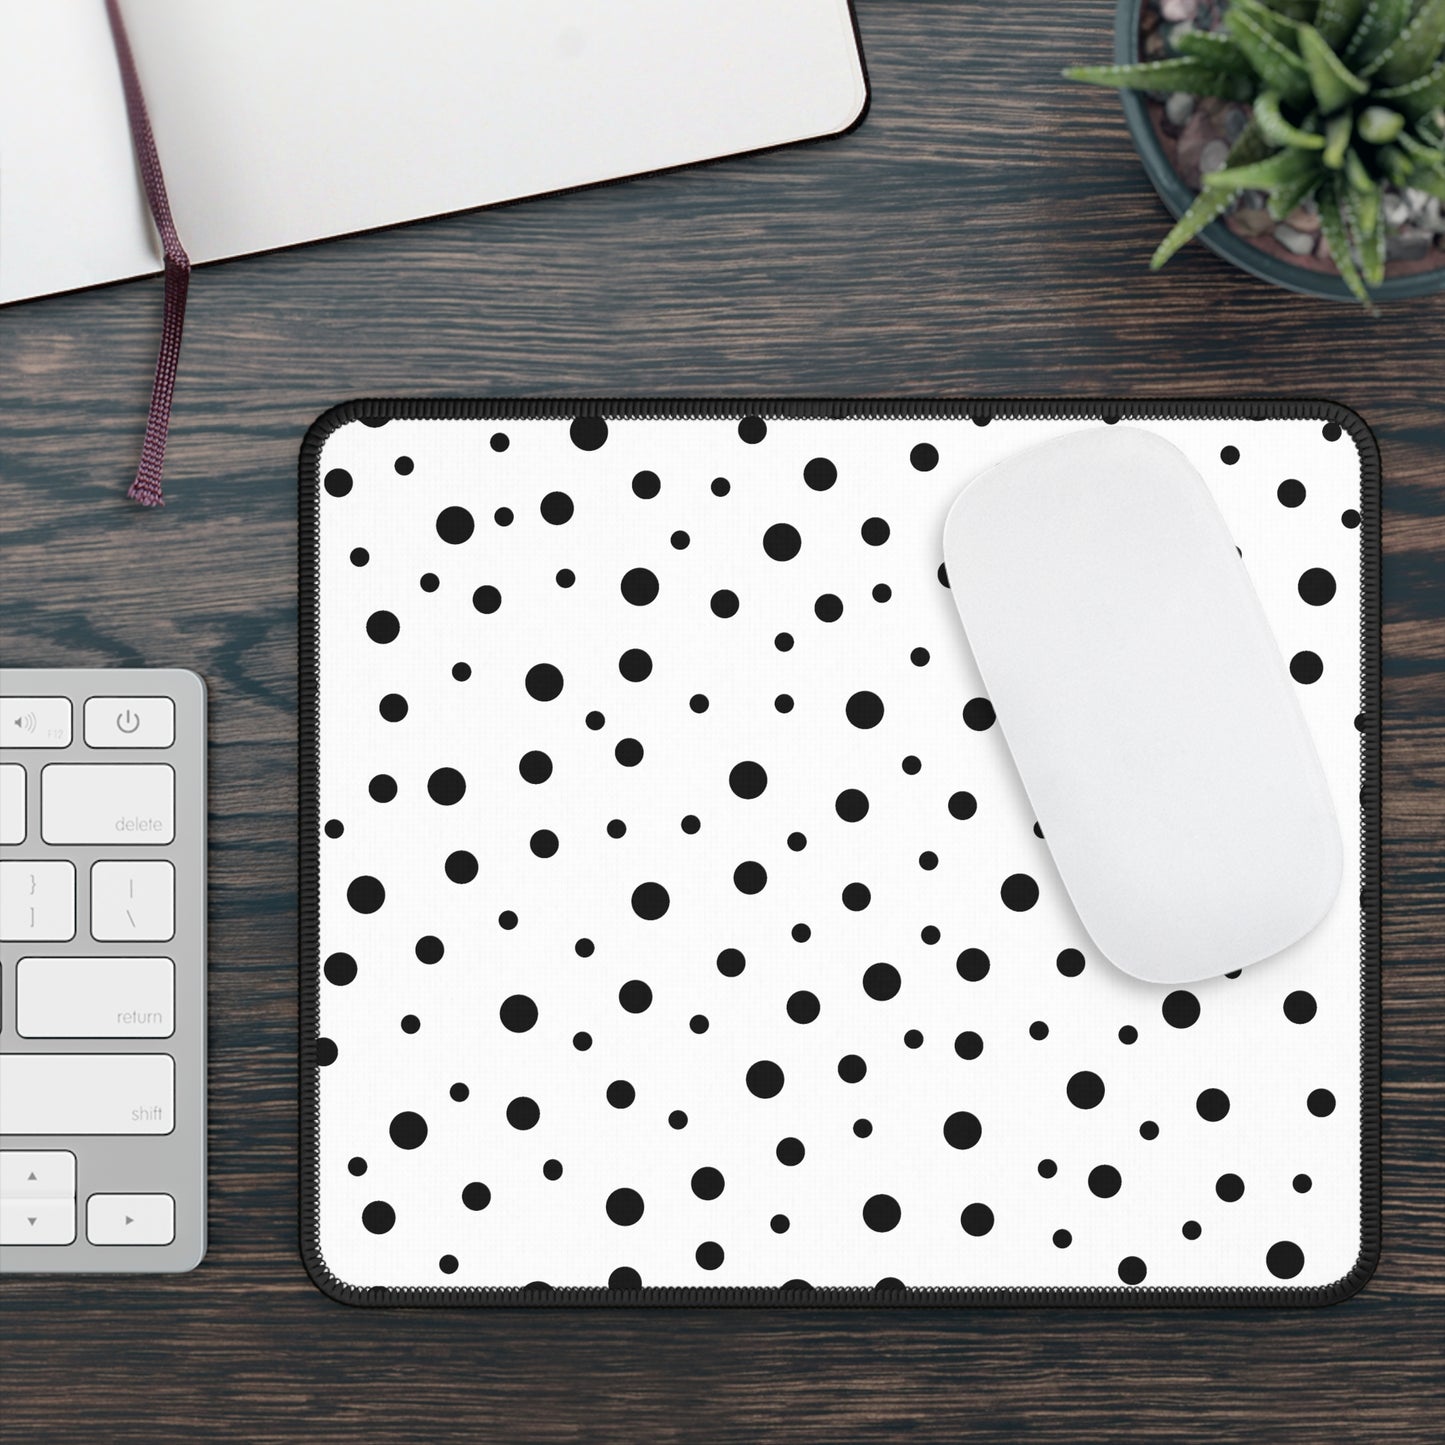 Black Dots & White Gaming Mouse Pad - Desk Cookies